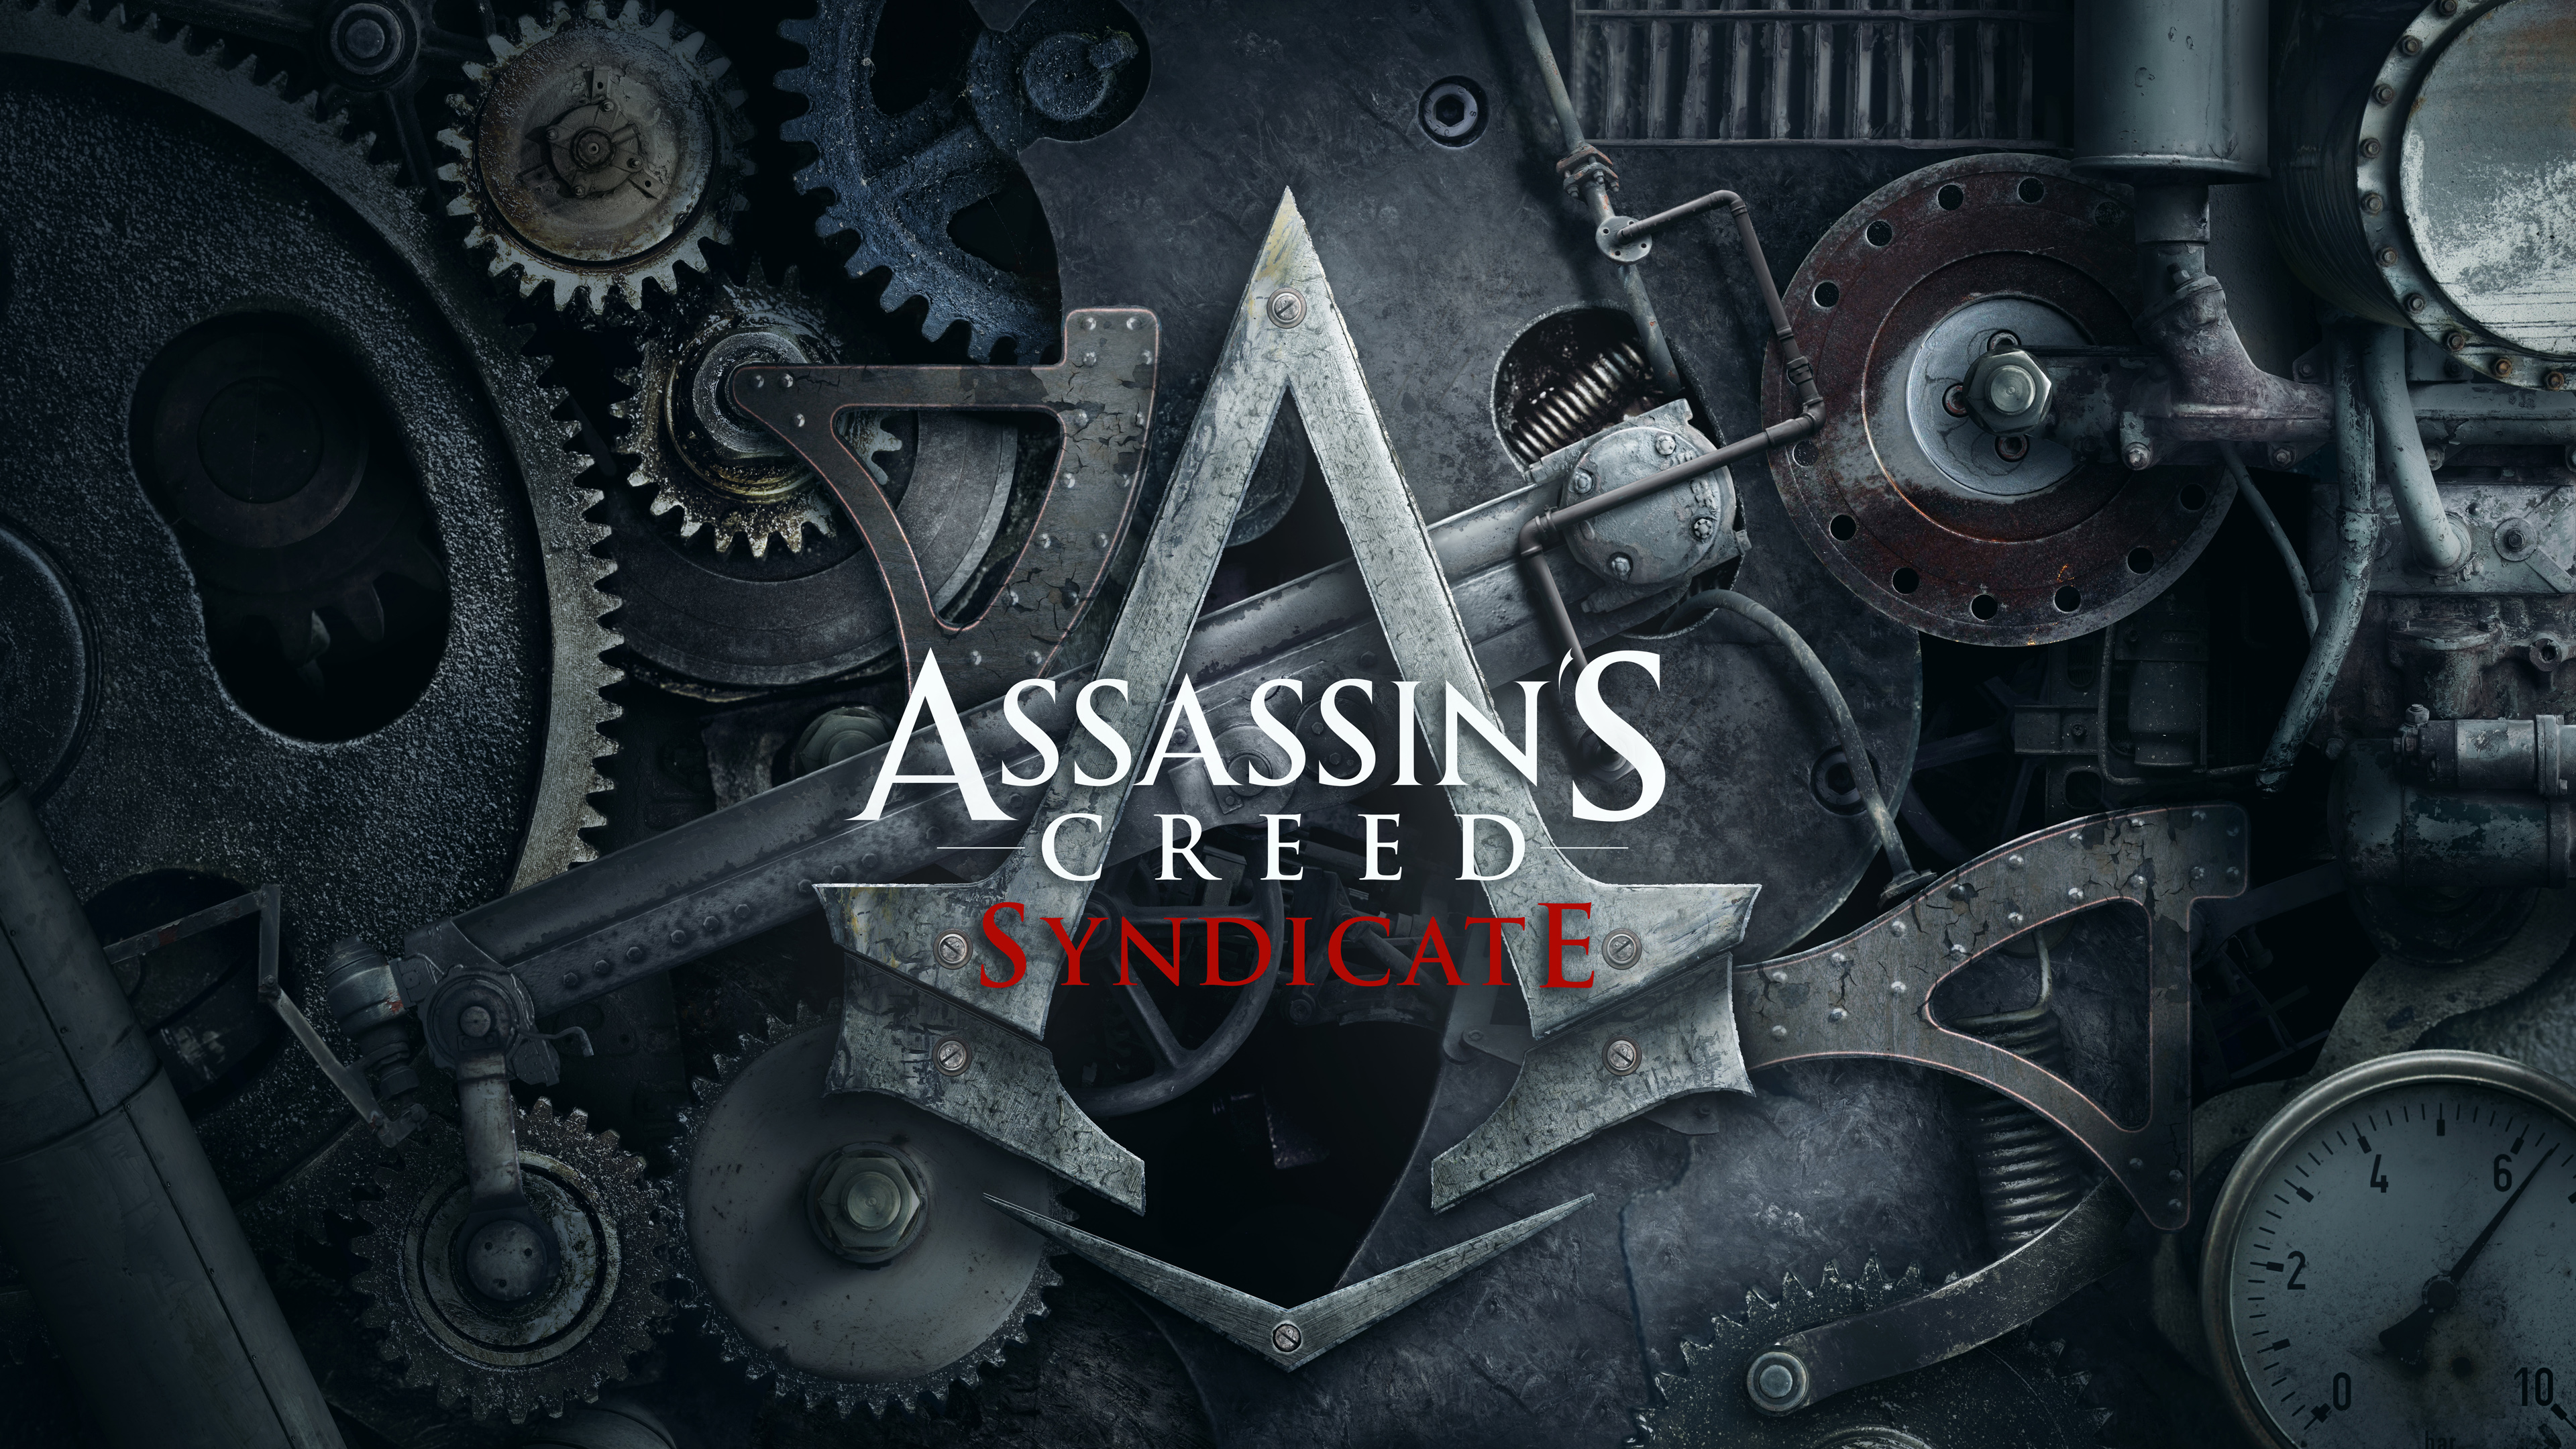 assassin's creed, video game, assassin's creed: syndicate, logo lock screen backgrounds